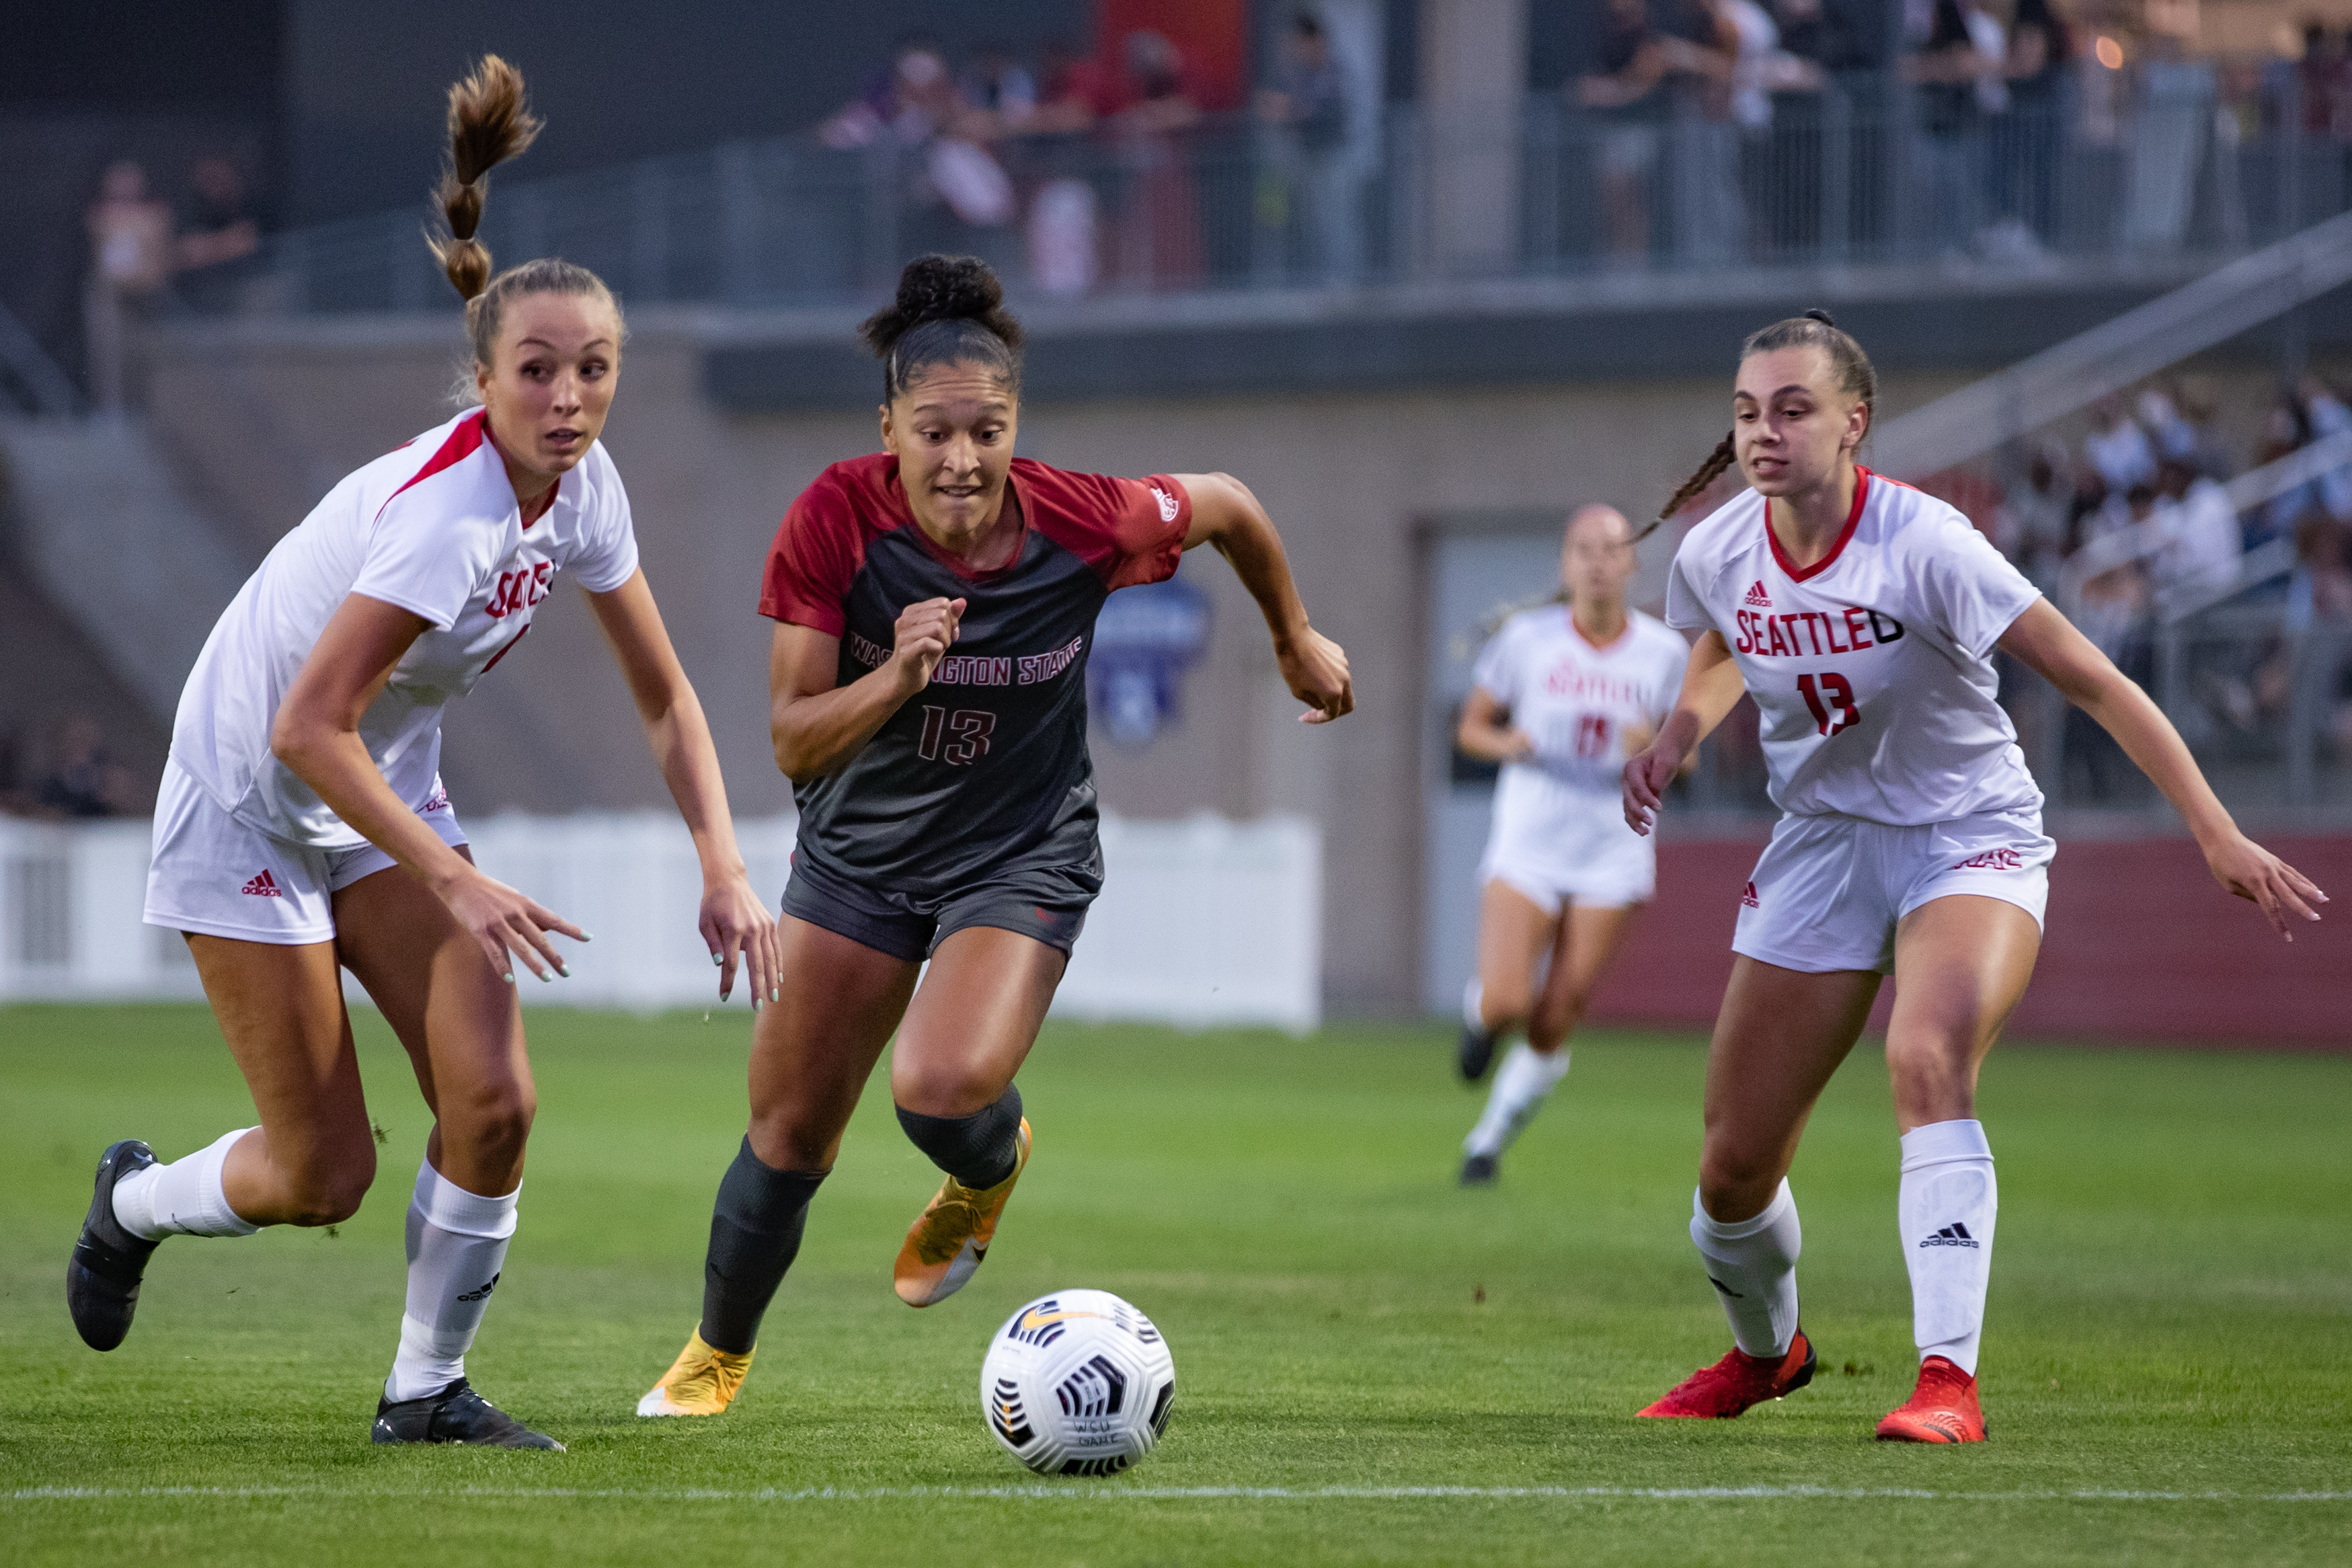 PULLMAN, WA - September 9: Washington State women’s soccer team fall to Seattle 1-2 at Lower Soccer Field